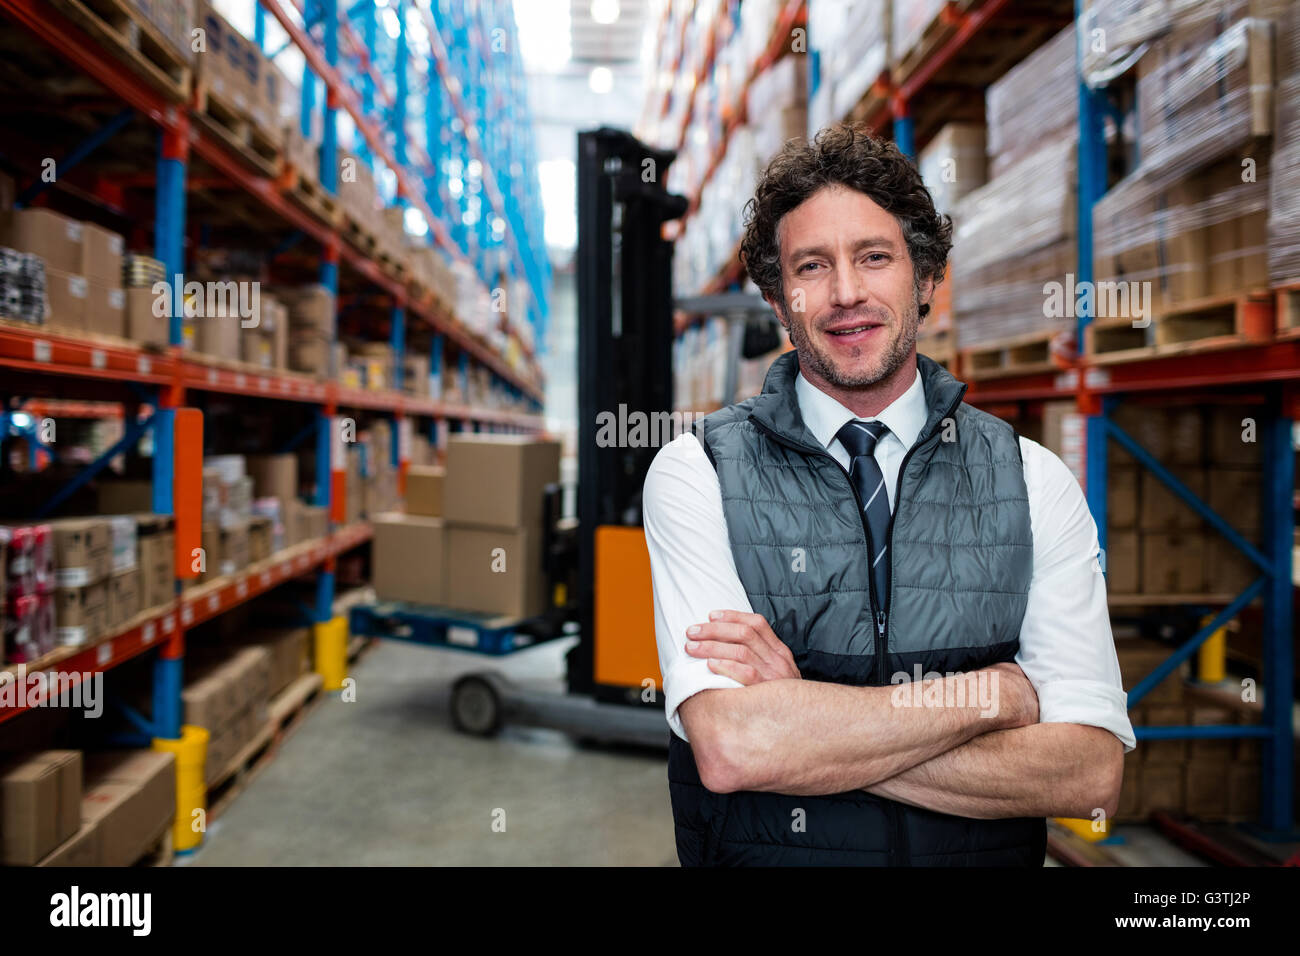 Warehouse manager front of forklift Stock Photo